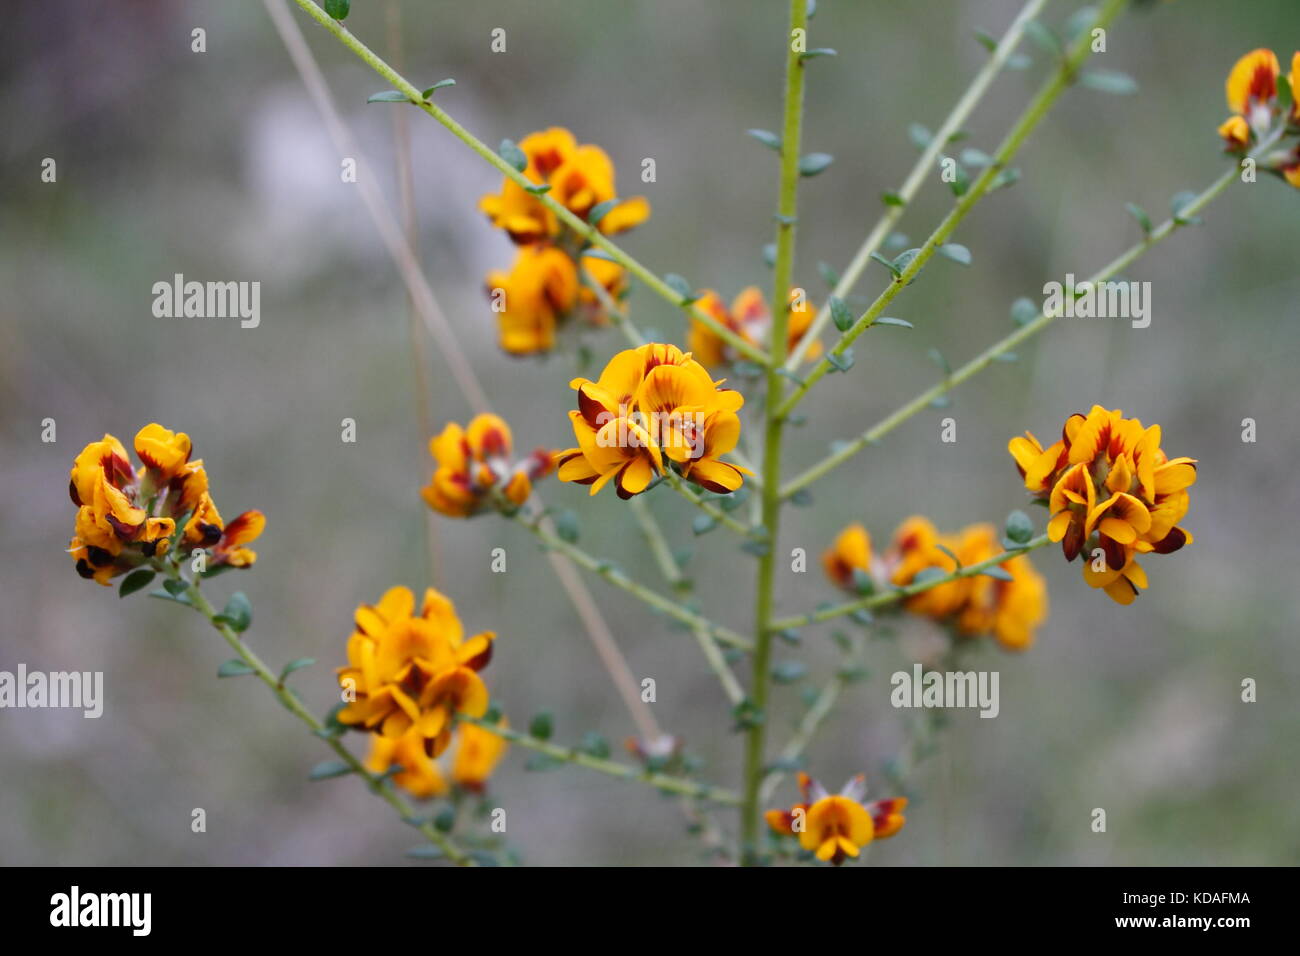 Egg and Bacon plant - eutaxia obovata - in flower Stock Photo